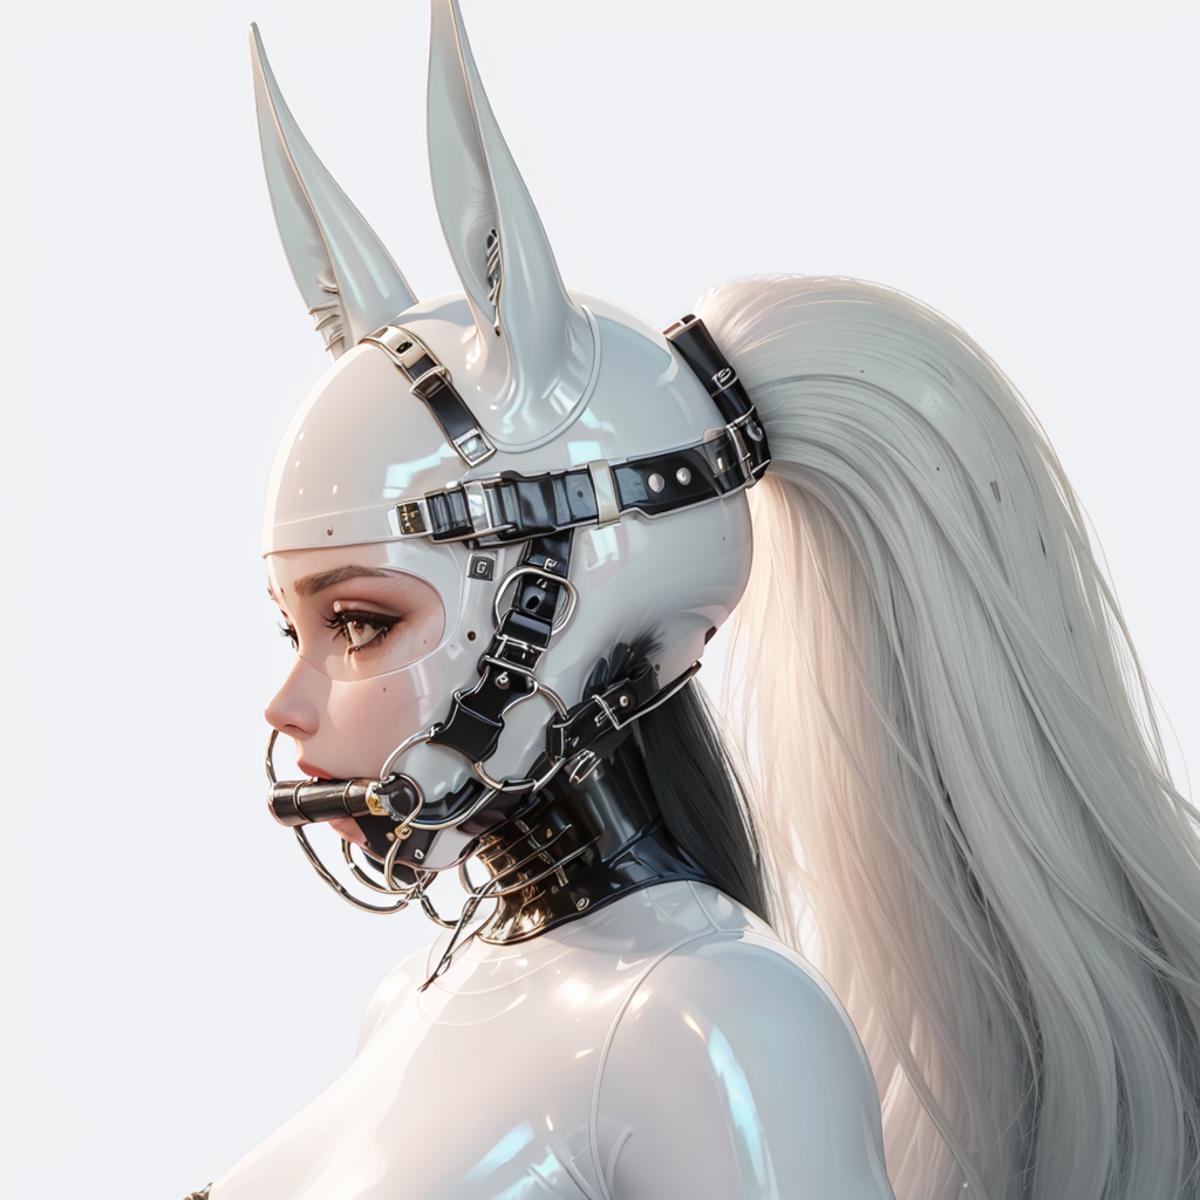 AI model image by AiTimeIsNow